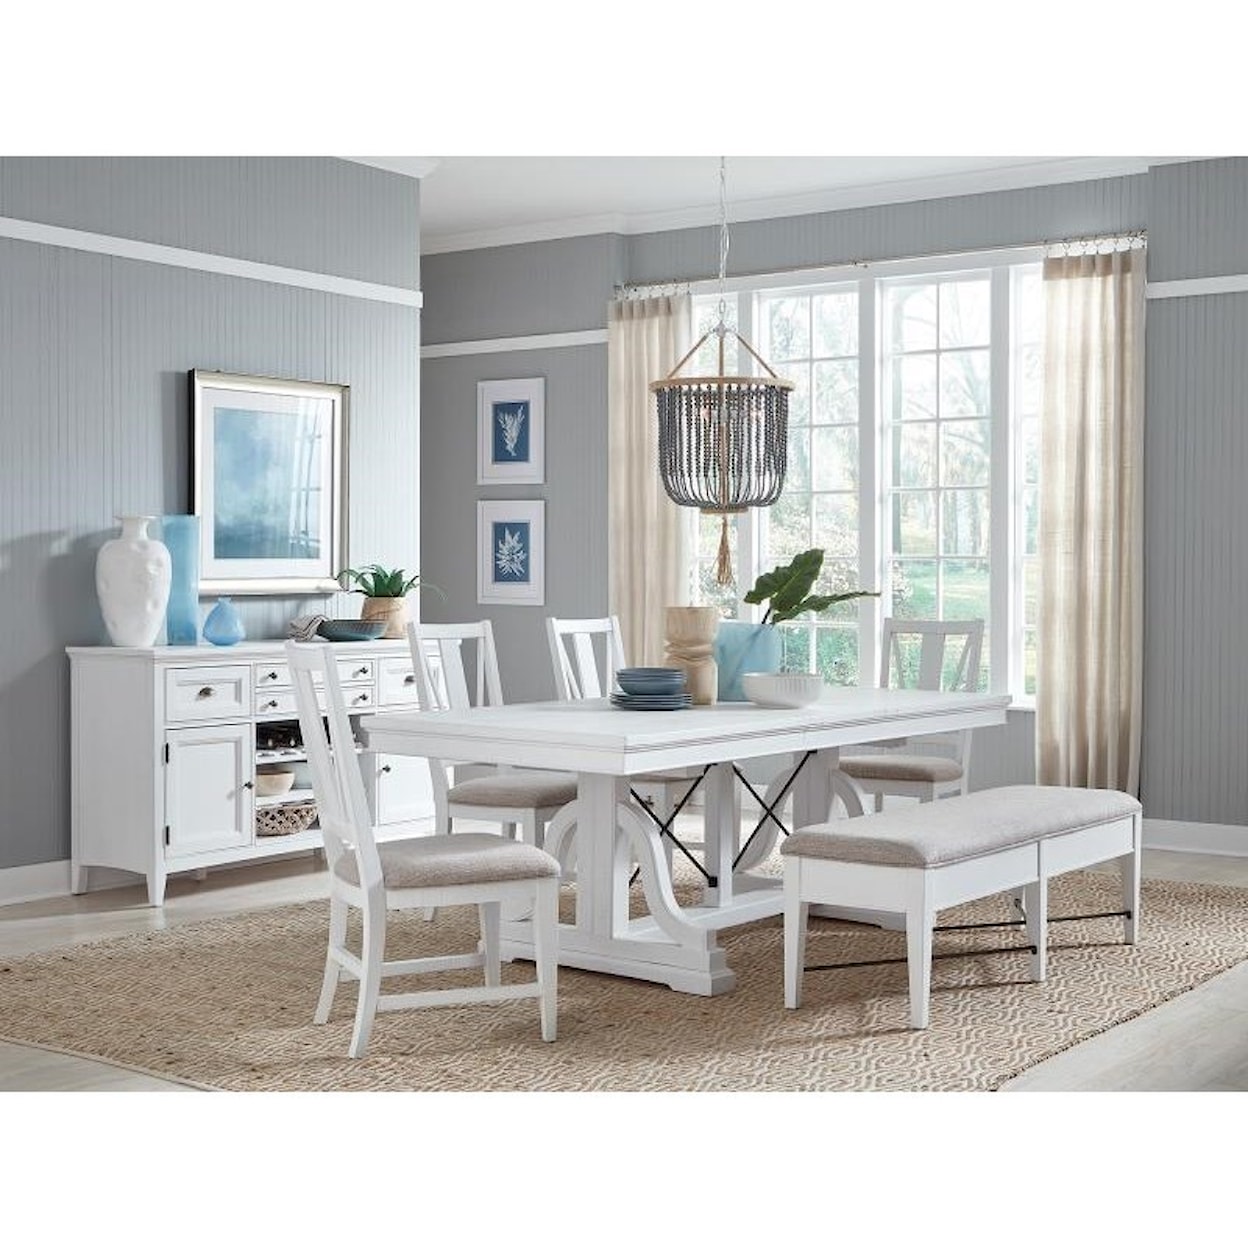 Magnussen Home Heron Cove Dining Formal Dining Room Group